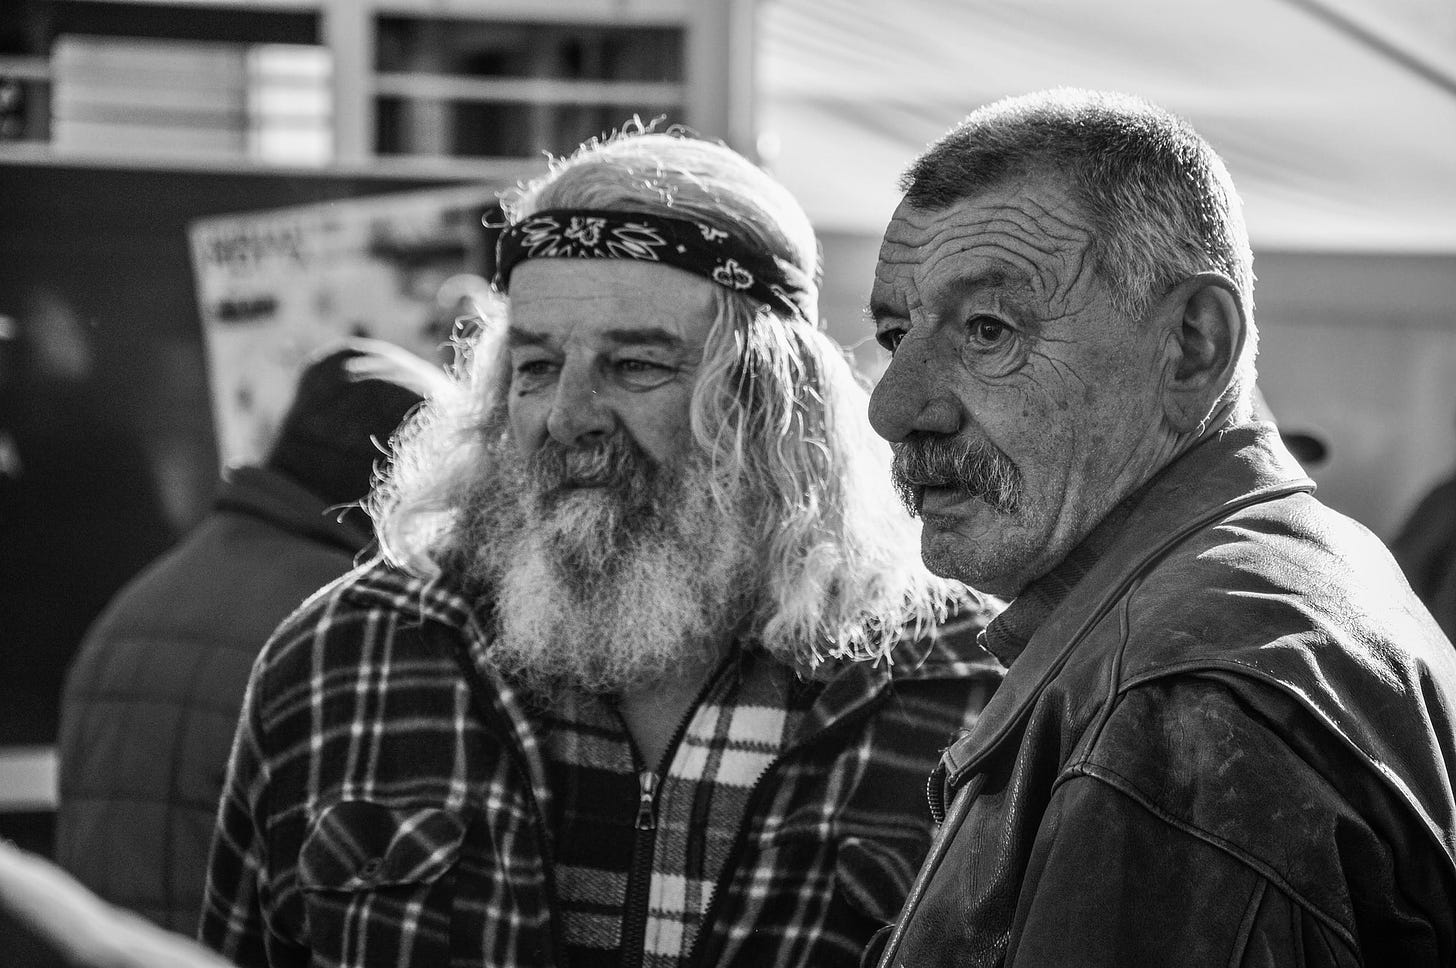 Two old men -one dressed in plaid wearing a beard and head band -the other hair cropped short .